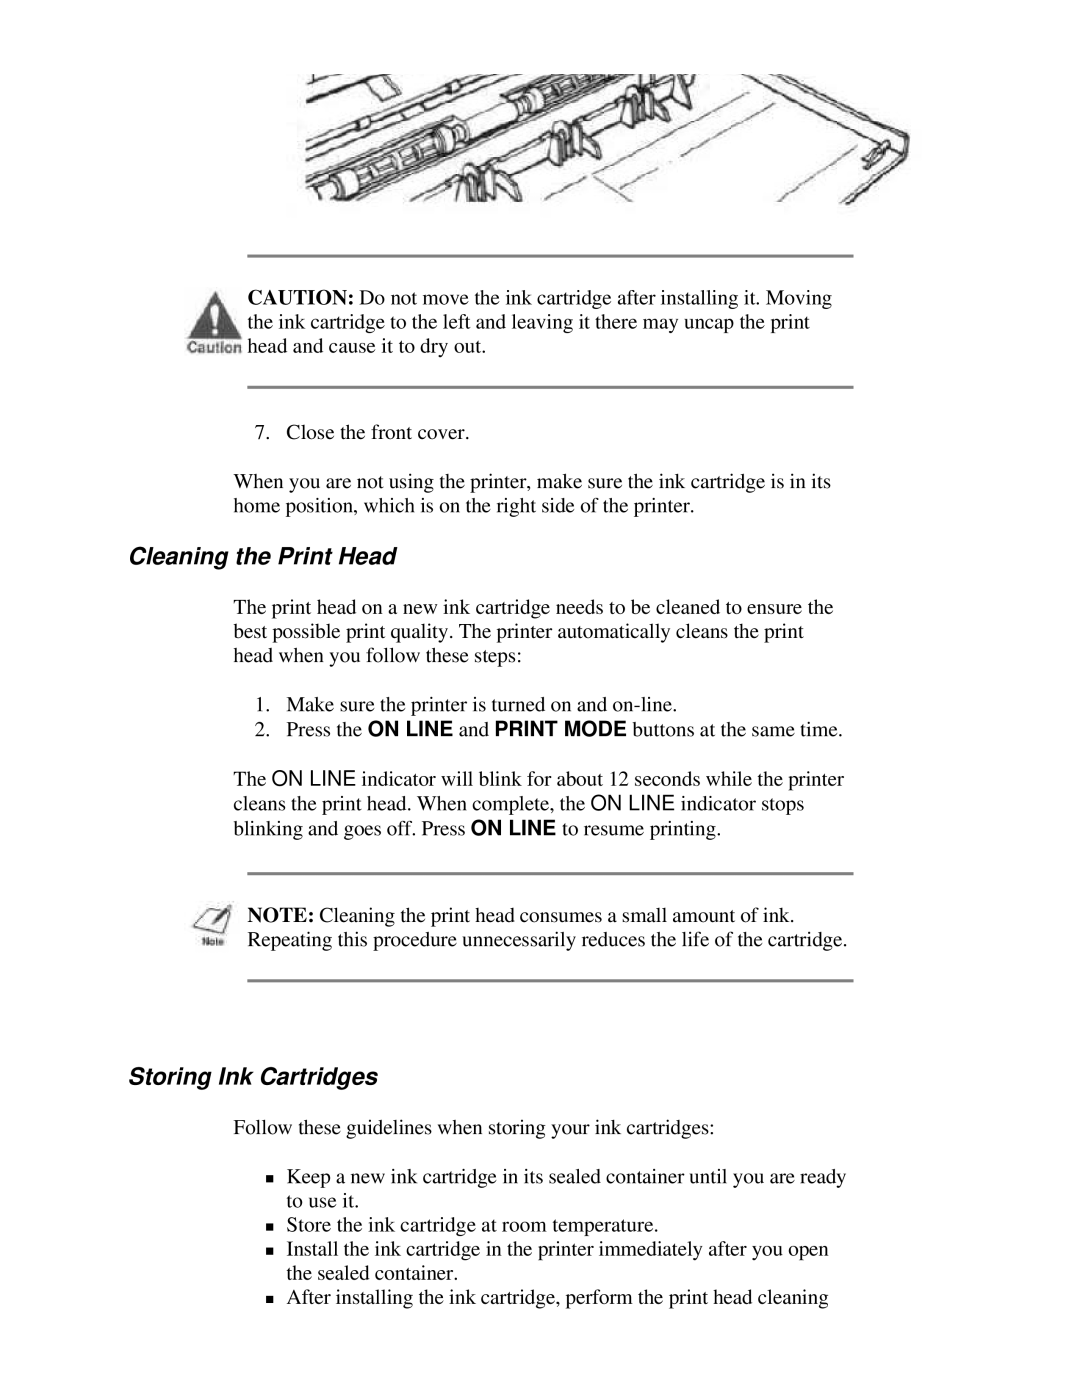 Canon BJ-230 user manual Cleaning the Print Head, Storing Ink Cartridges 